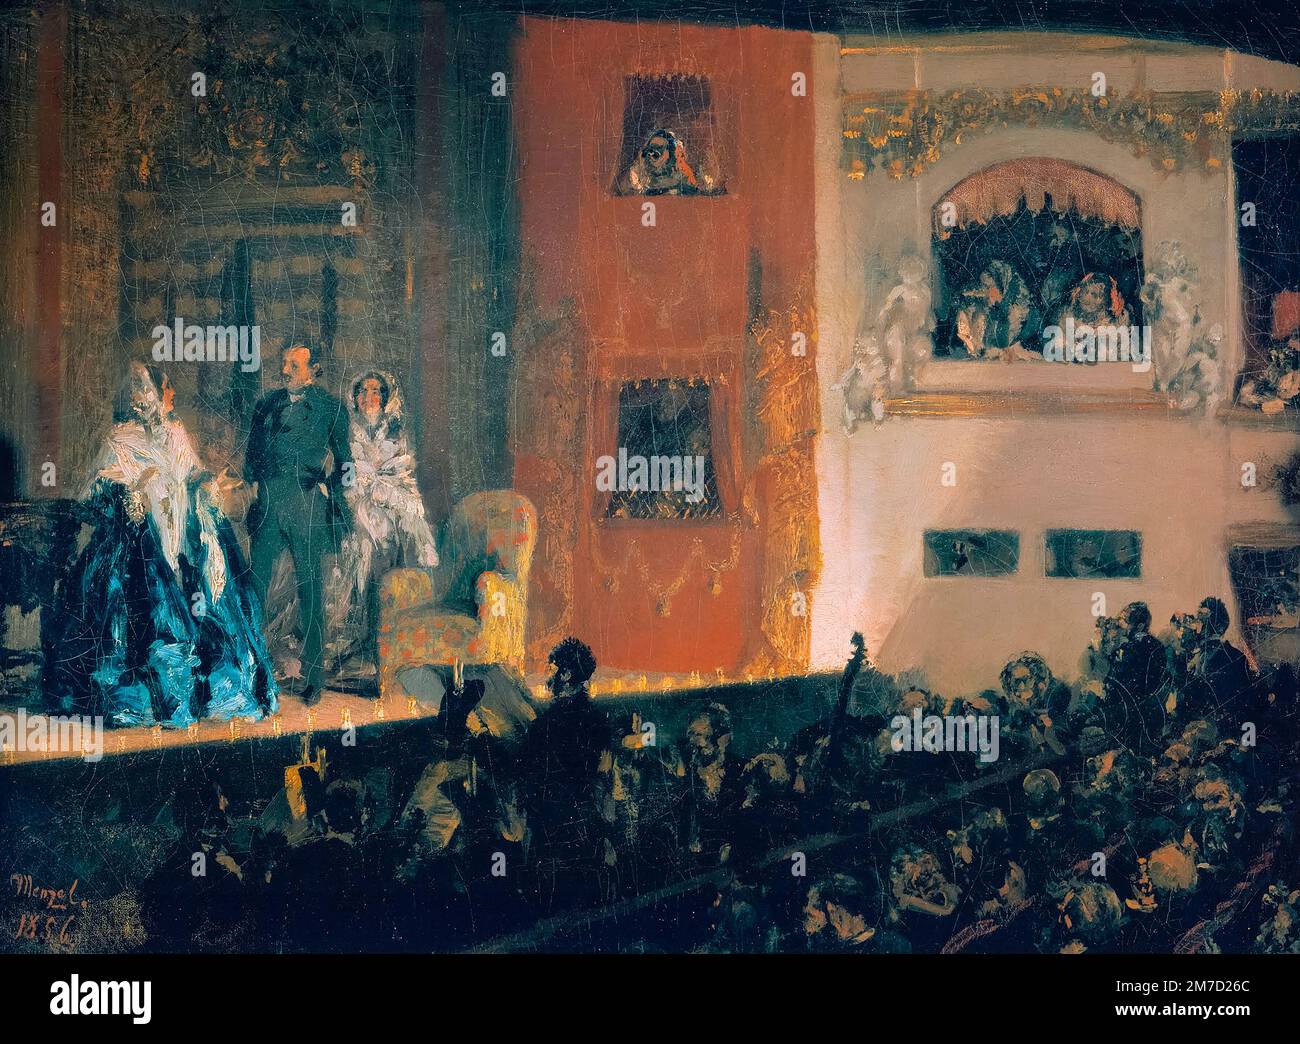 Adolph Menzel, The Théâtre du Gymnase (Paris), painting in oil on canvas, 1884 Stock Photo